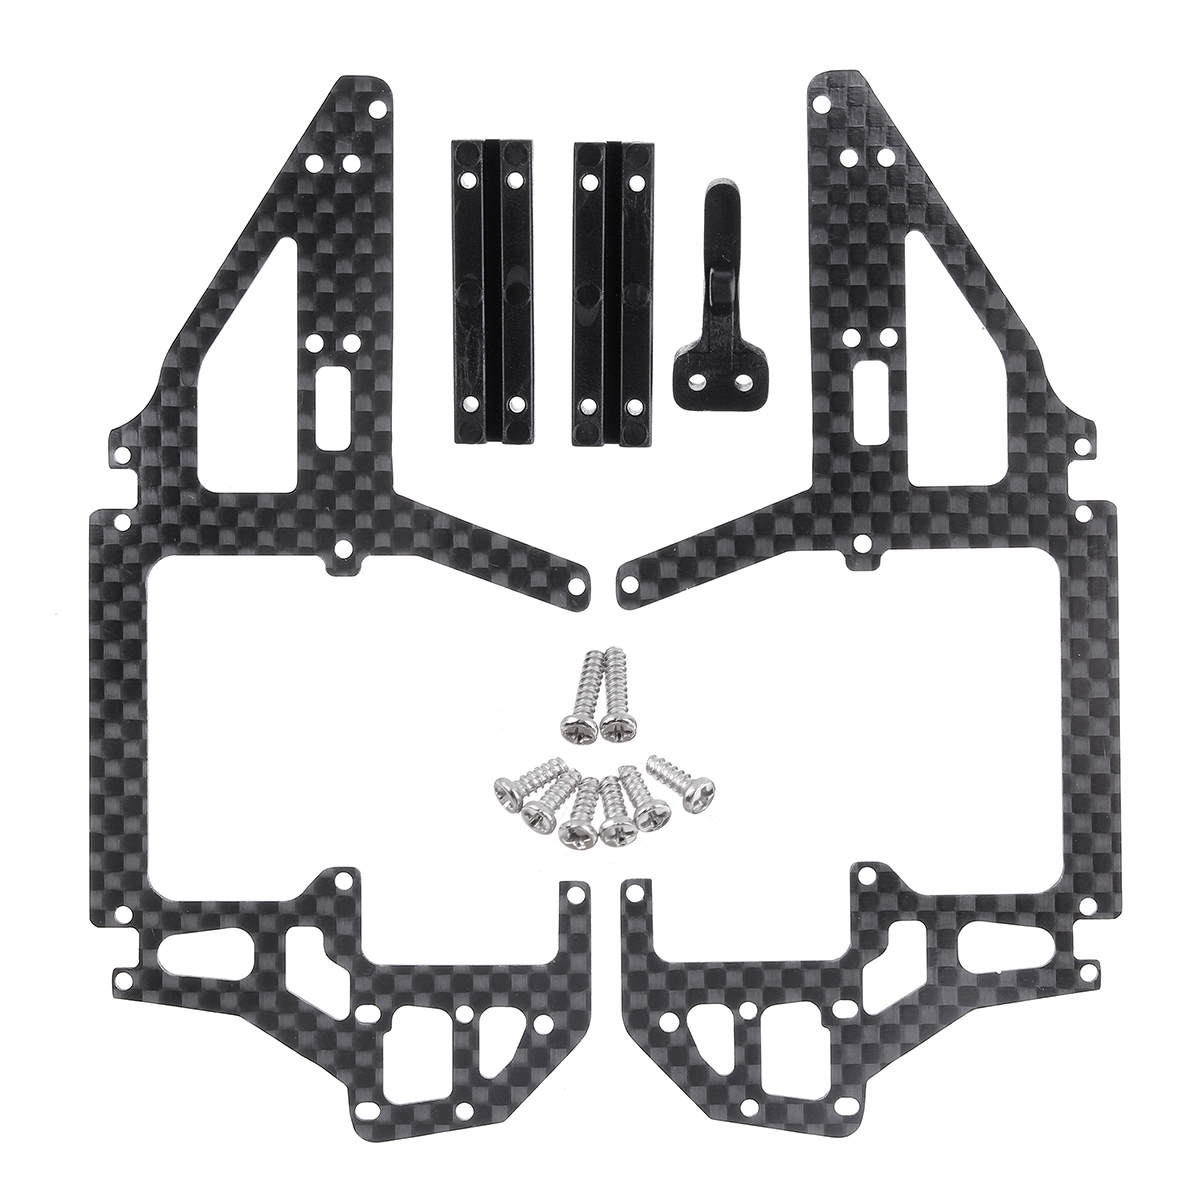 Eachine E180 Side Plate RC Helicopter Parts